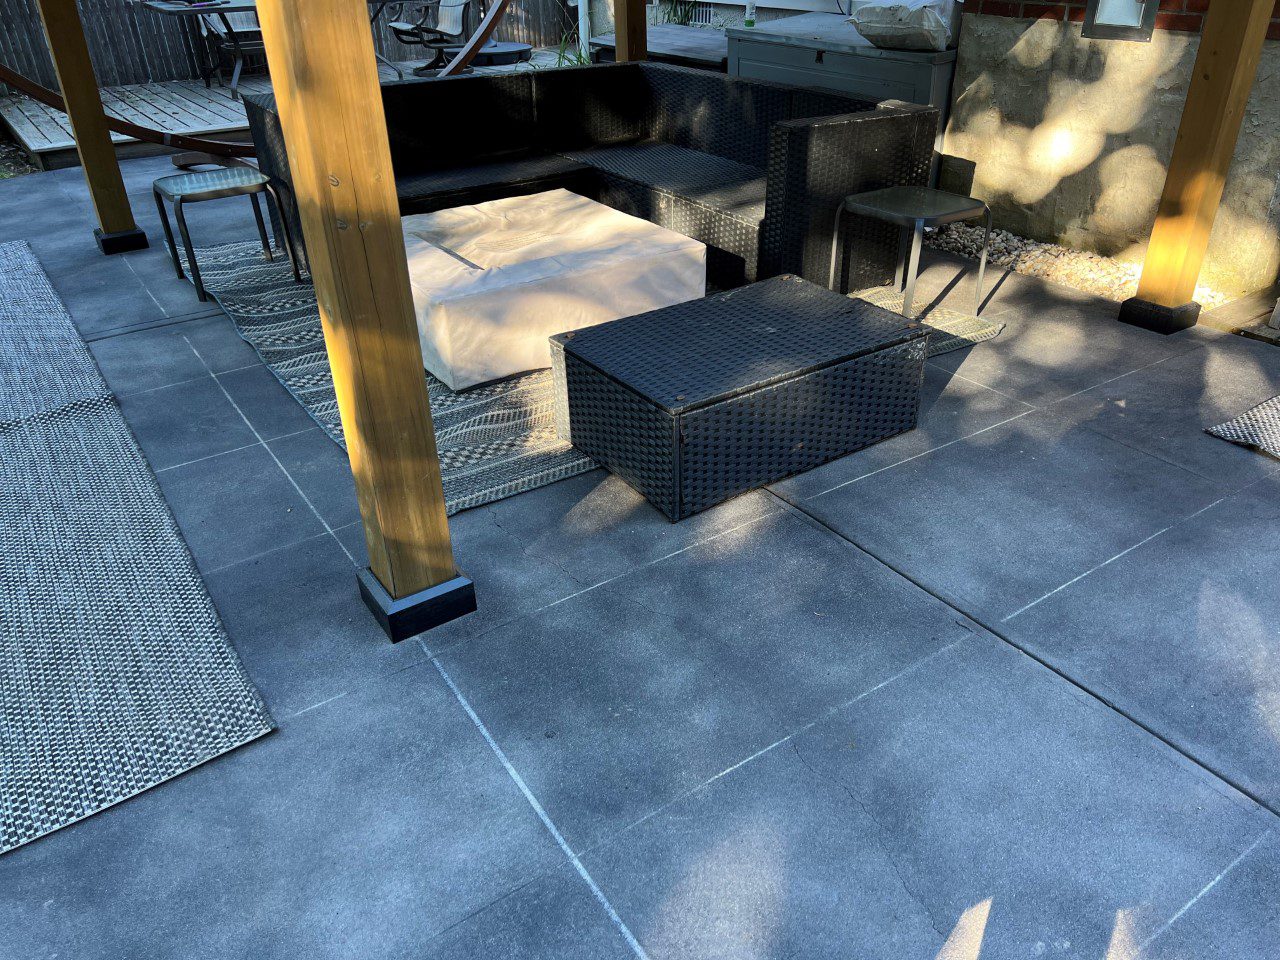 Black Antiquing stained scored concrete patio